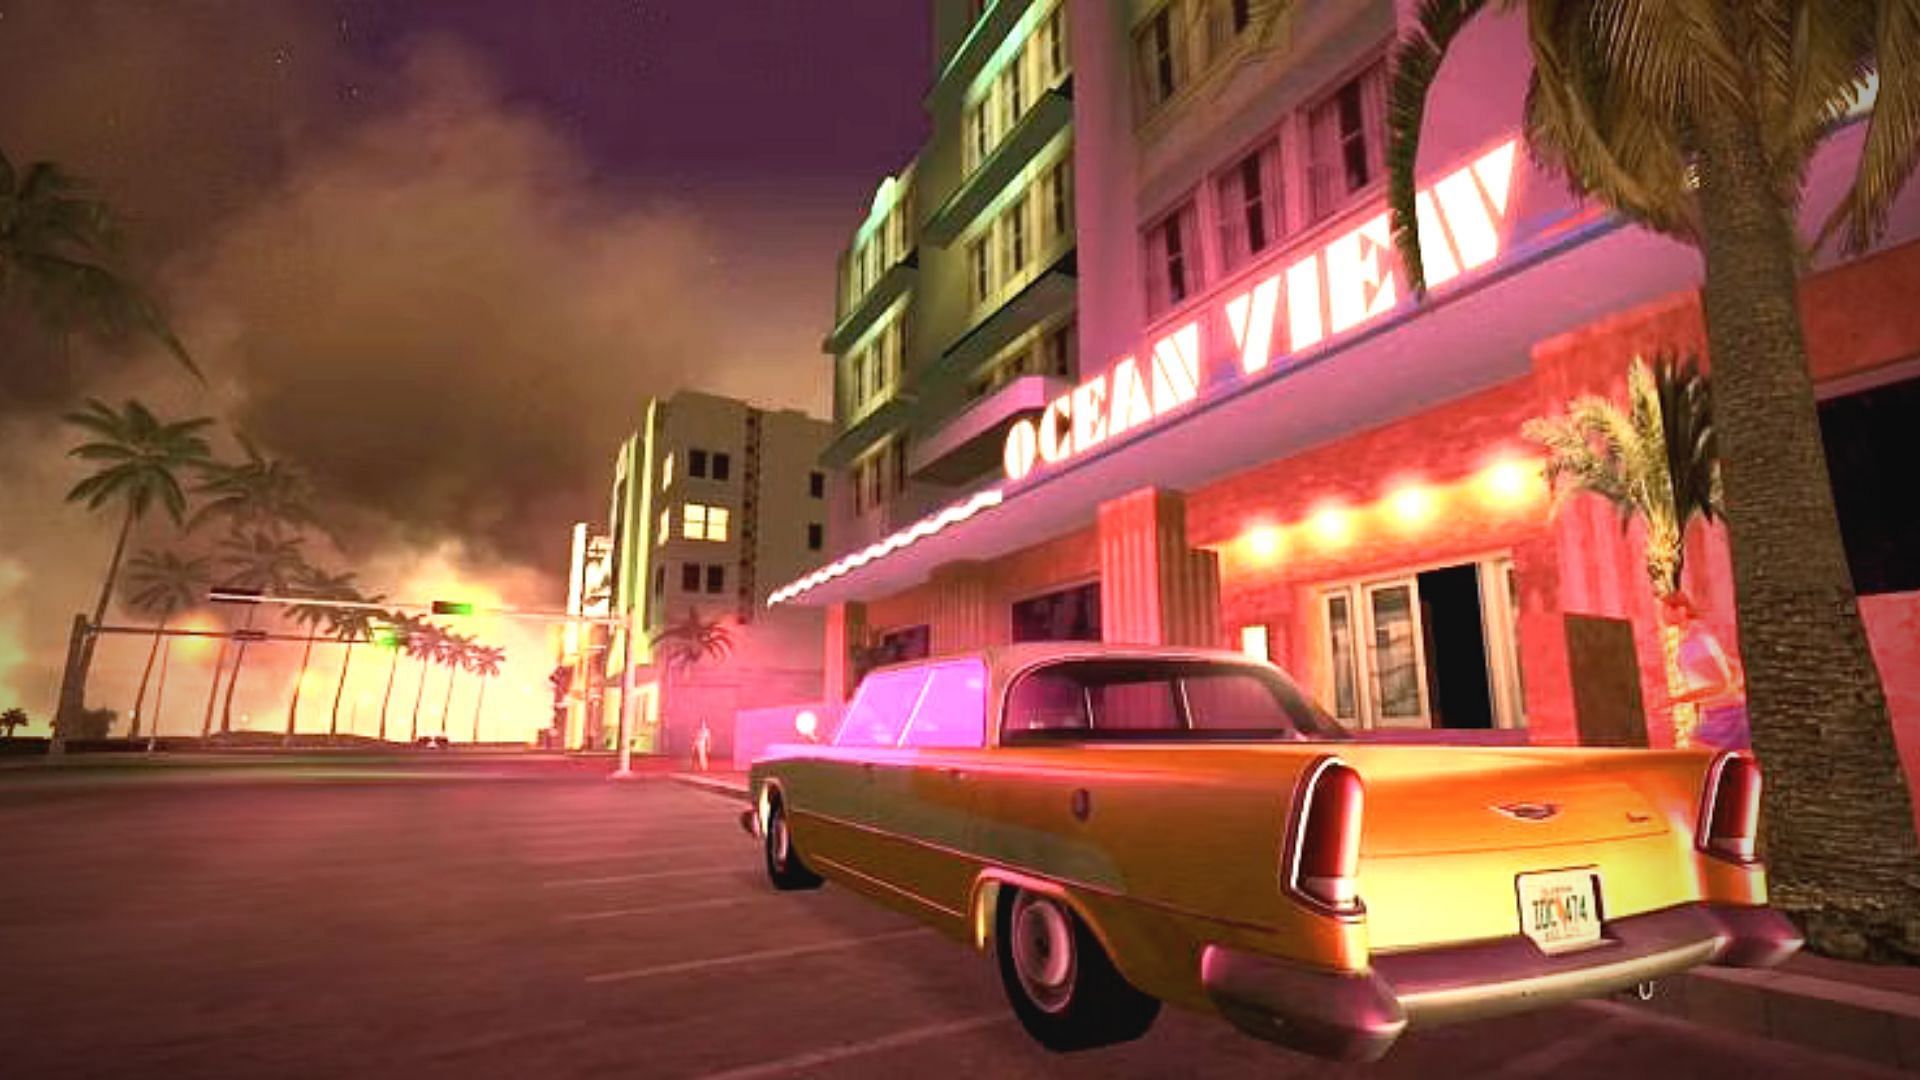 GTA series has some of the iconic locations that players still love (Image via Sportskeeda)